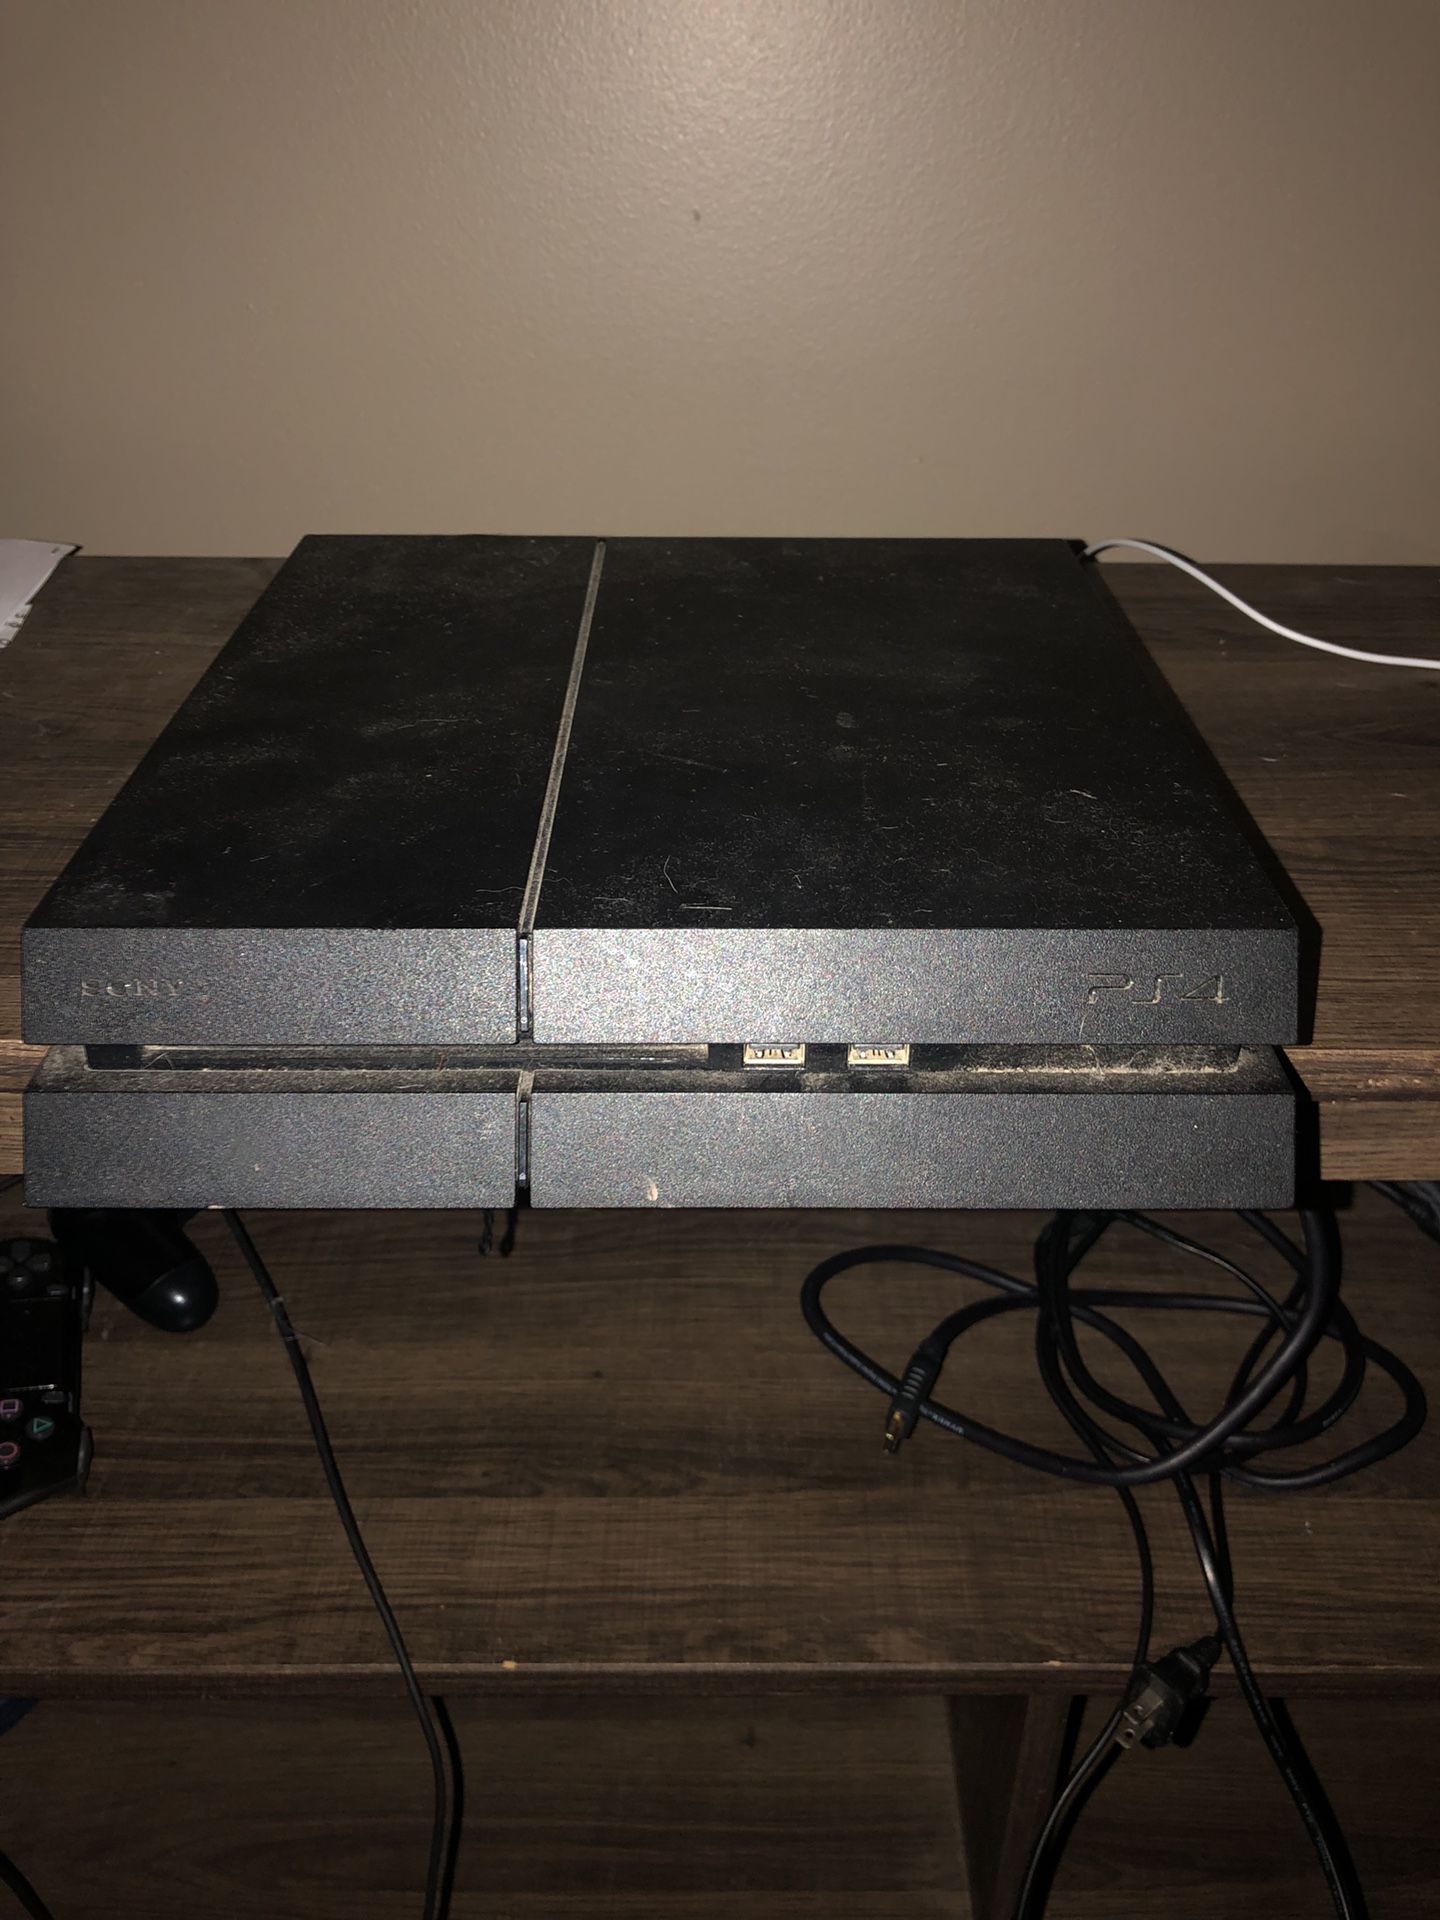 PS4 for sale want gone ASAP!